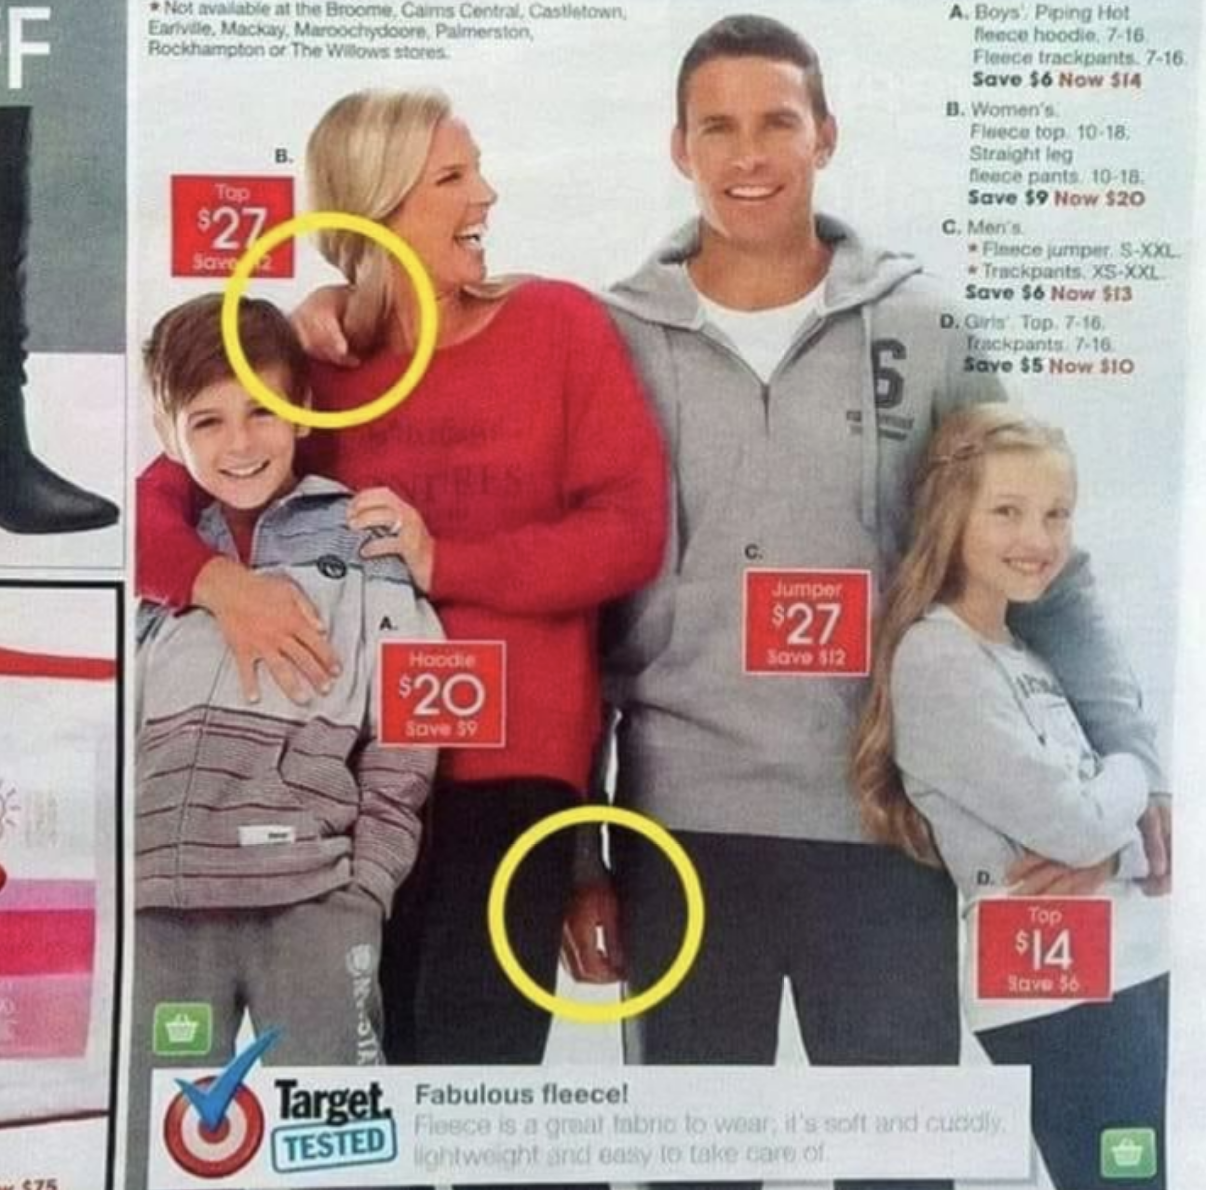 It&#x27;s a clothing ad showing a family. and the dad has two right hands, one around his wife&#x27;s shoulder and one hanging down